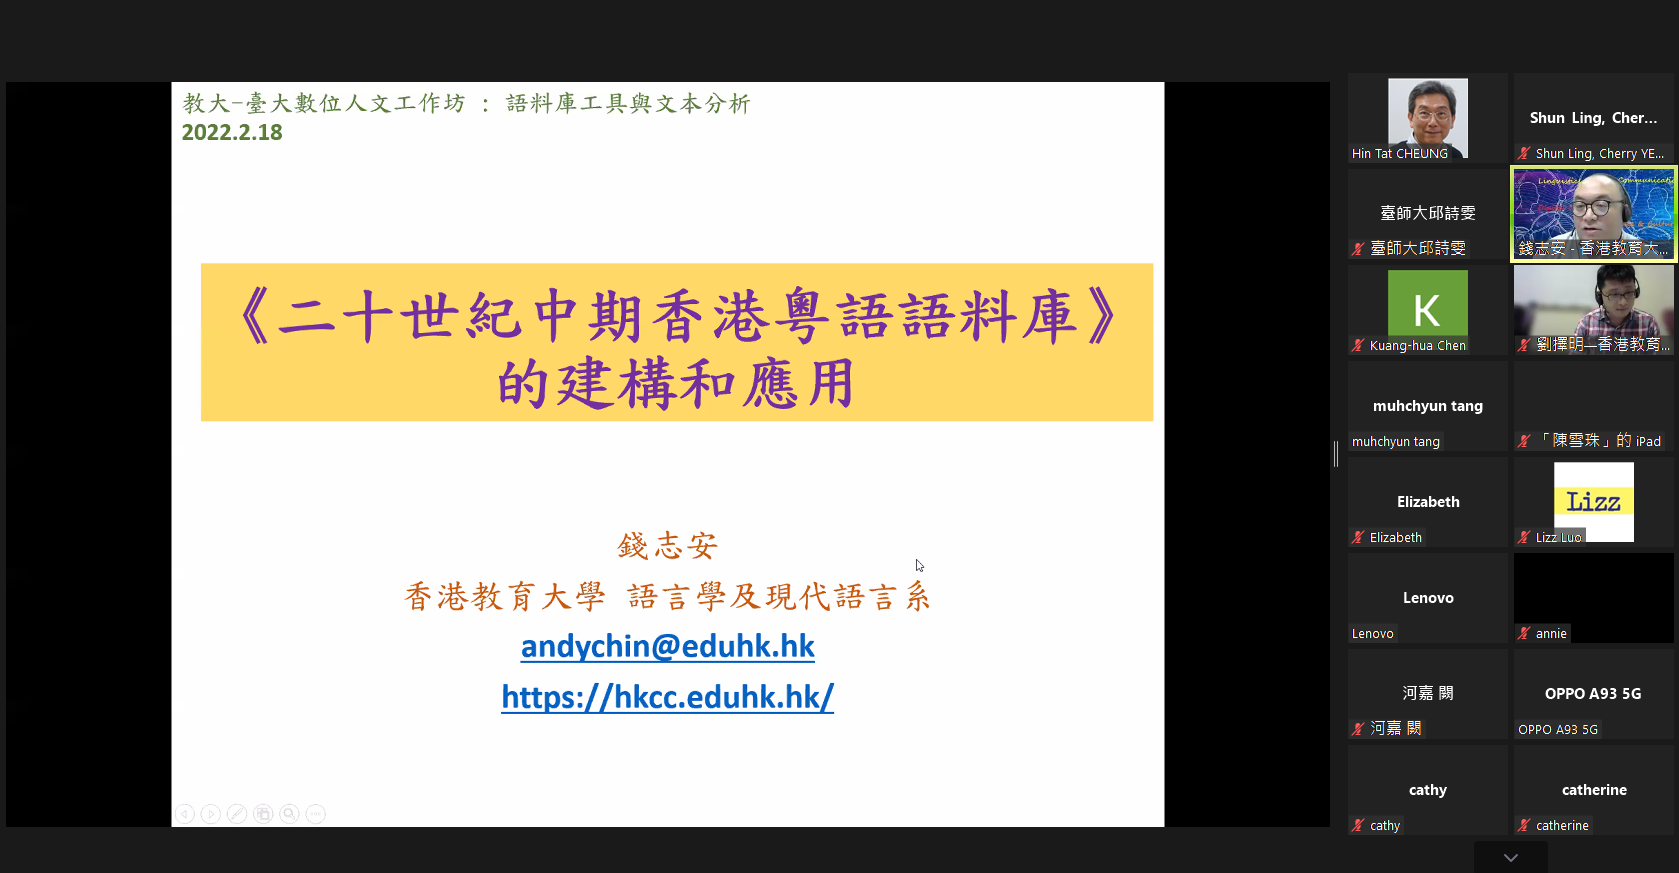 Dr Andy Chin presented the construction and application of his “Corpus of Mid-20th Century Hong Kong Cantonese” (https://hkcc.eduhk.hk/) 